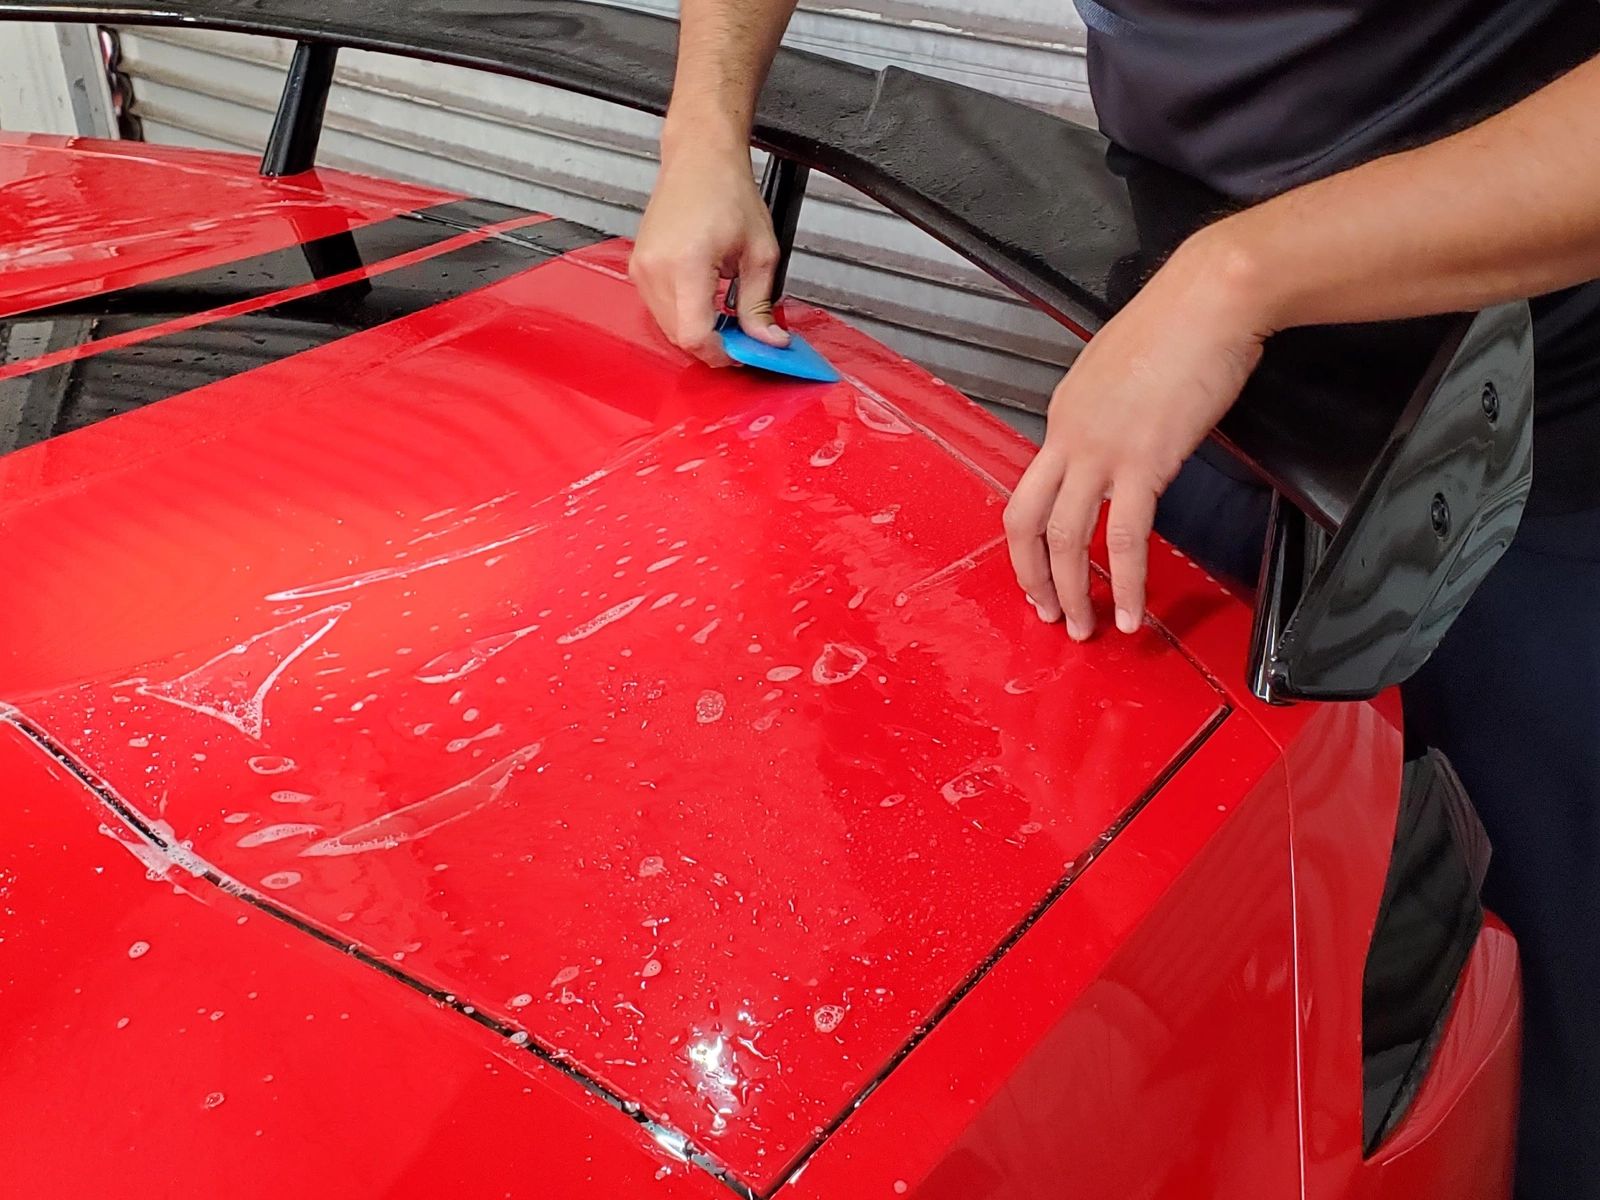 Can you put paint protection film over vinyl wrap? - Benefit and